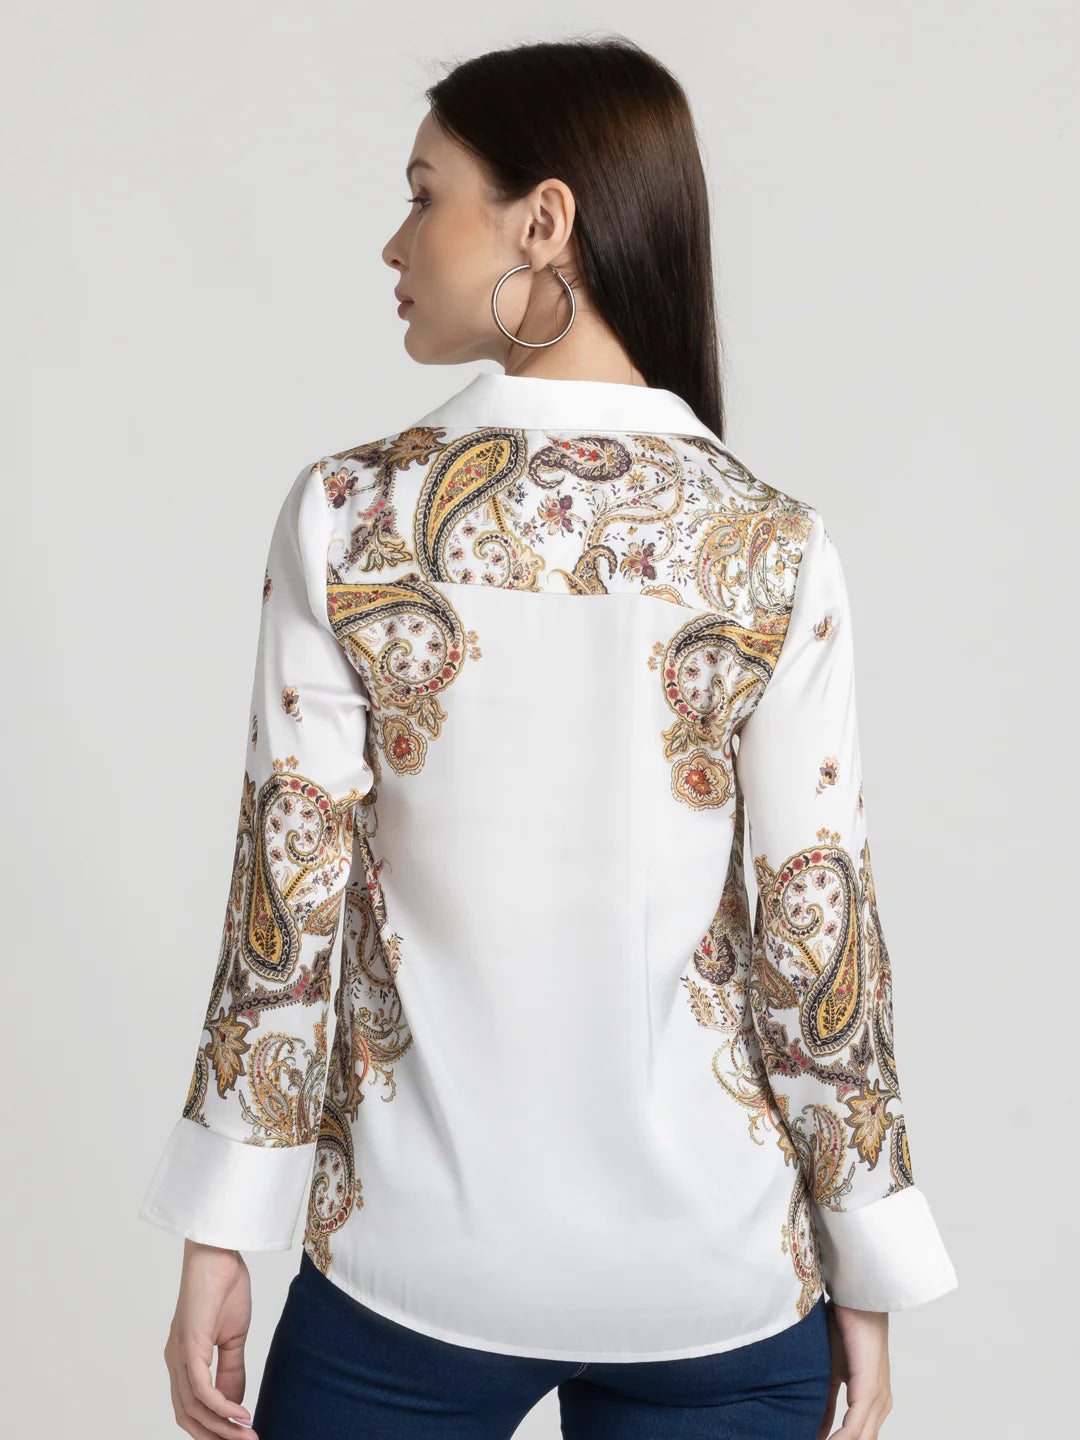 White Party Shirt for Women | Paisley Elegance Party Shirt